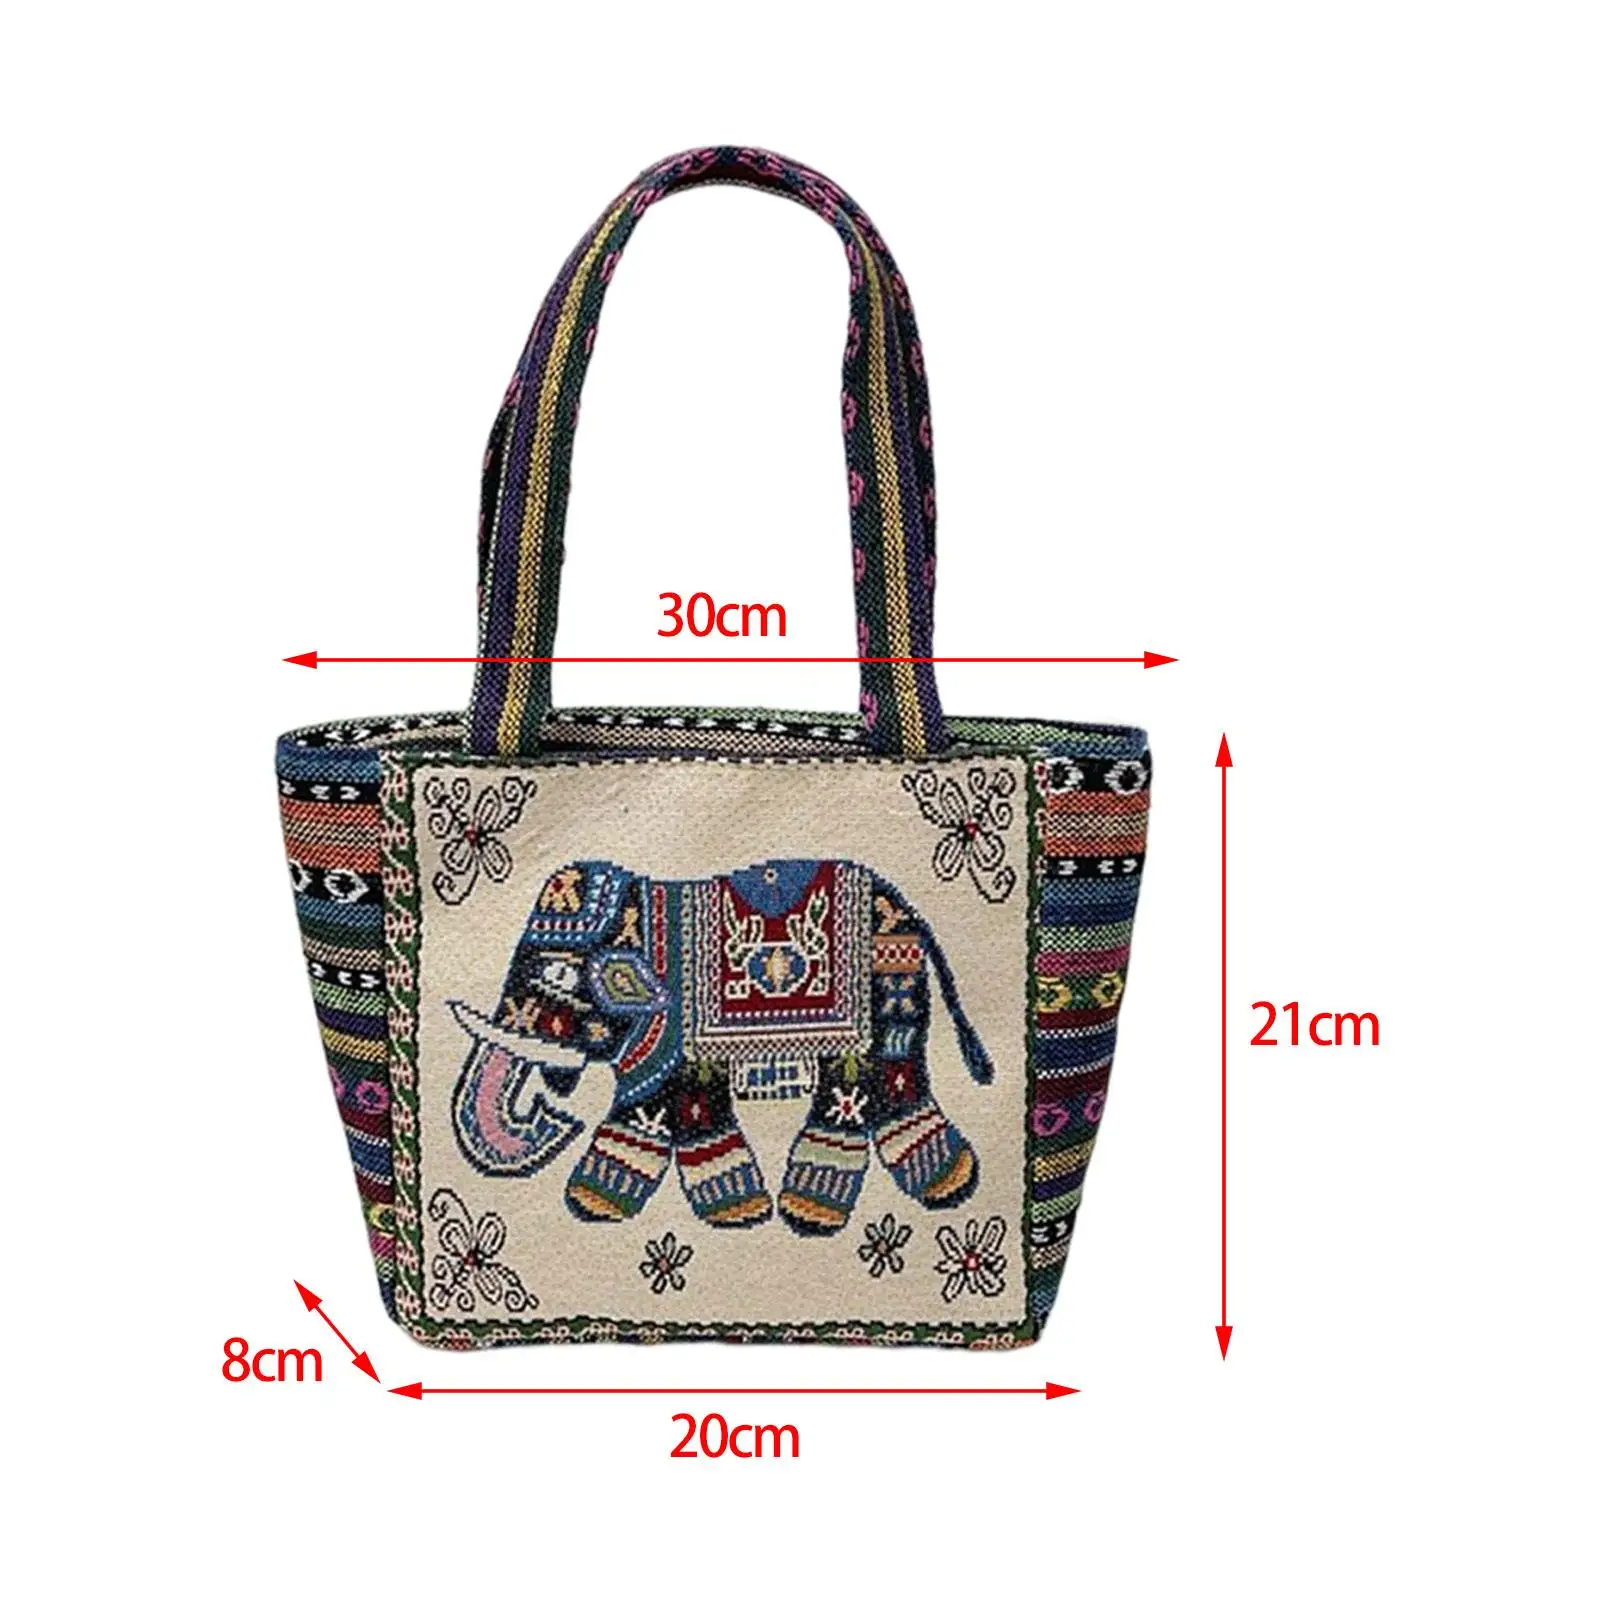 Canvas Tote Bag Aesthetic Lightweight Shoulder Bag for Work Party Shopping